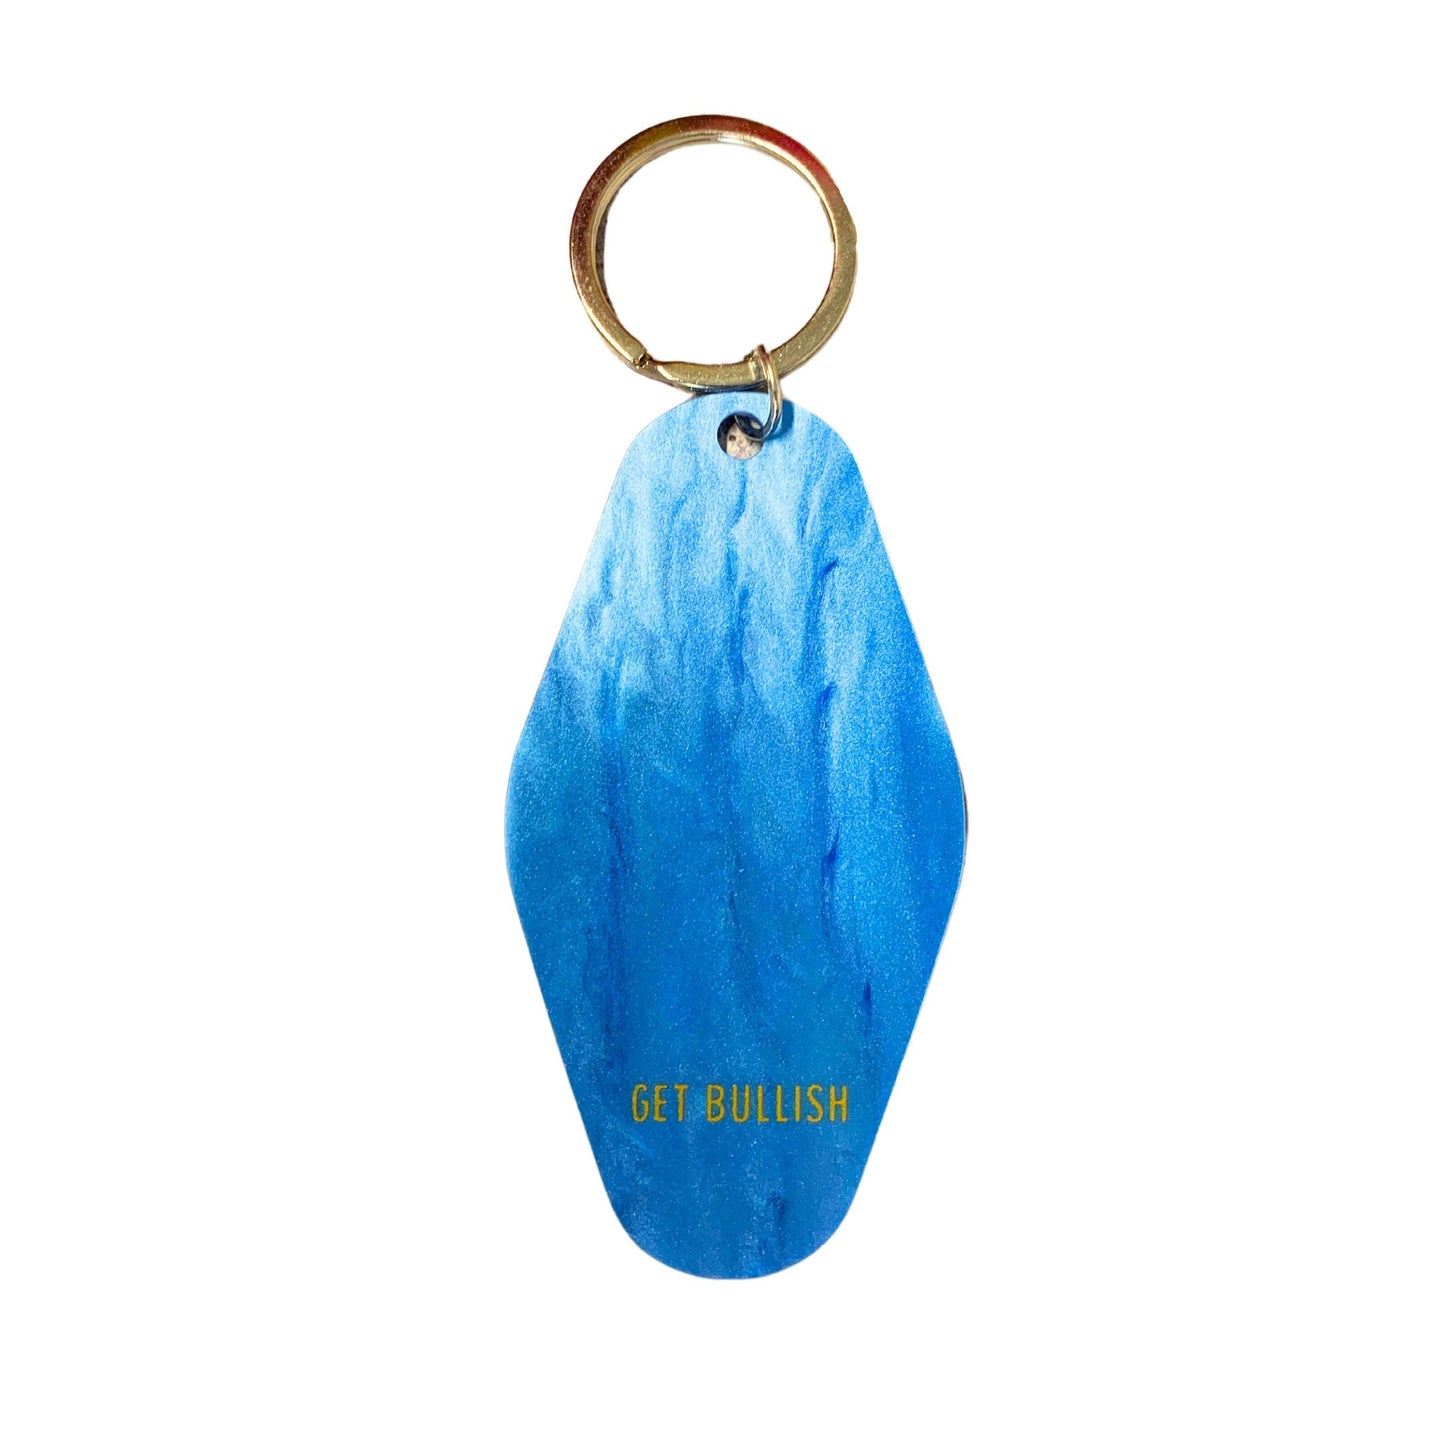 Employee of the Fucking Month Keychain in Blue Shimmer